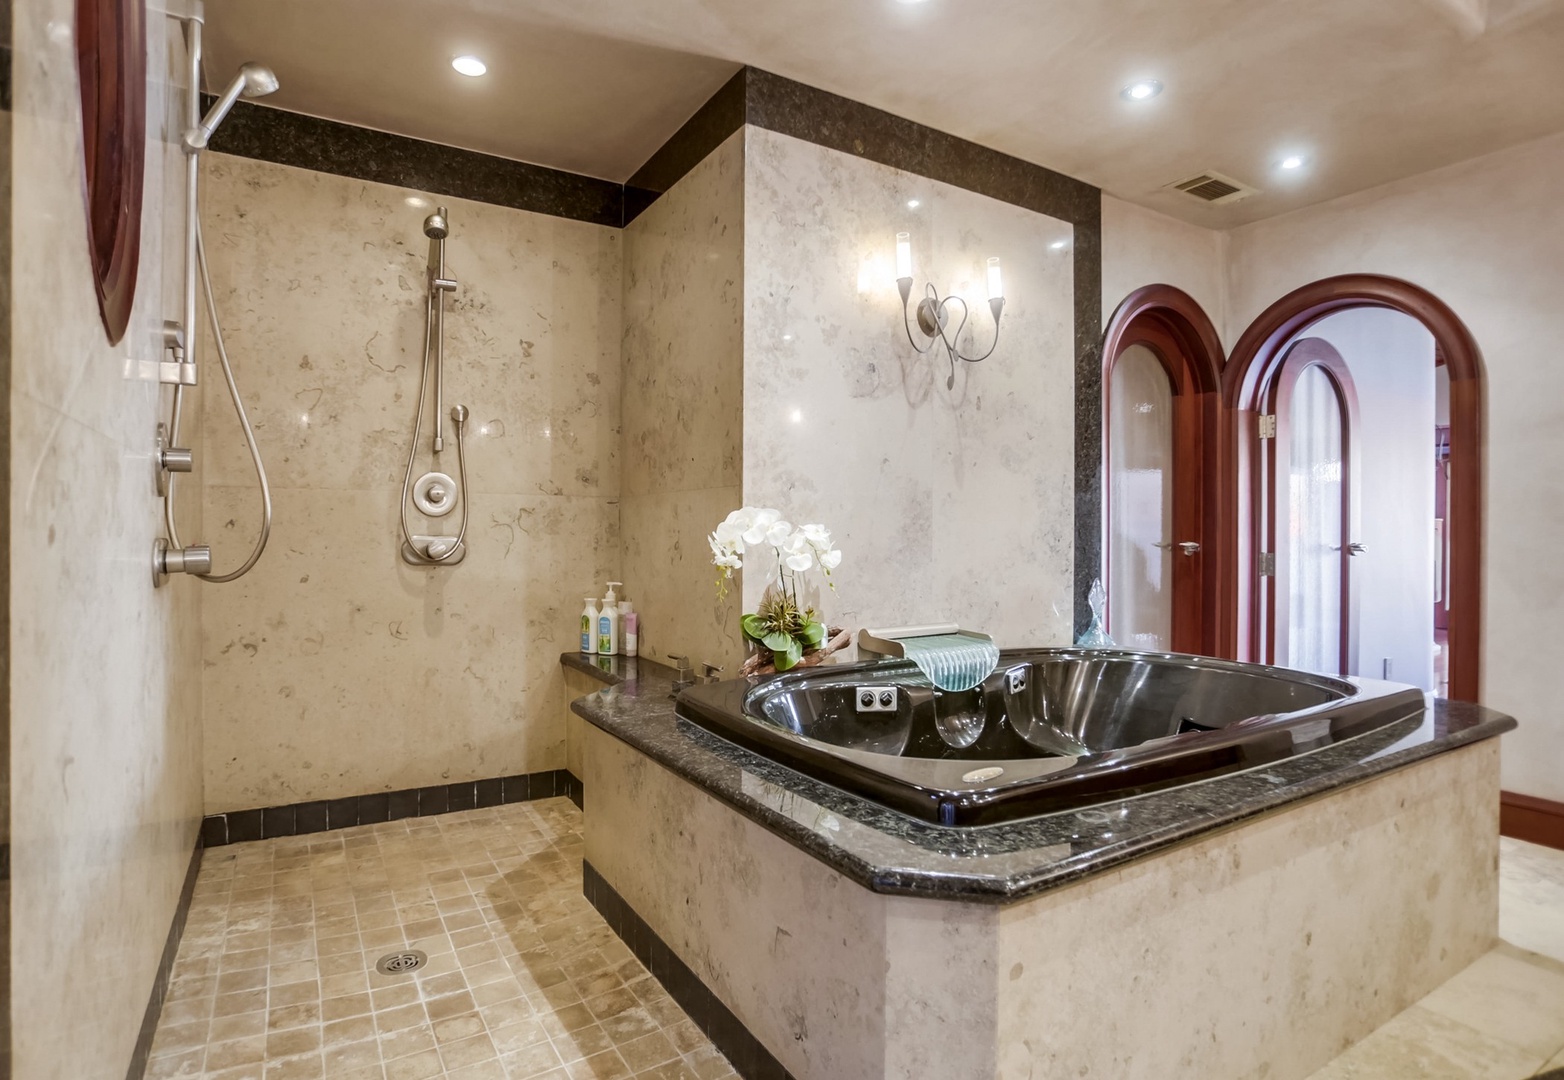 Jacuzzi tub and walk-in shower